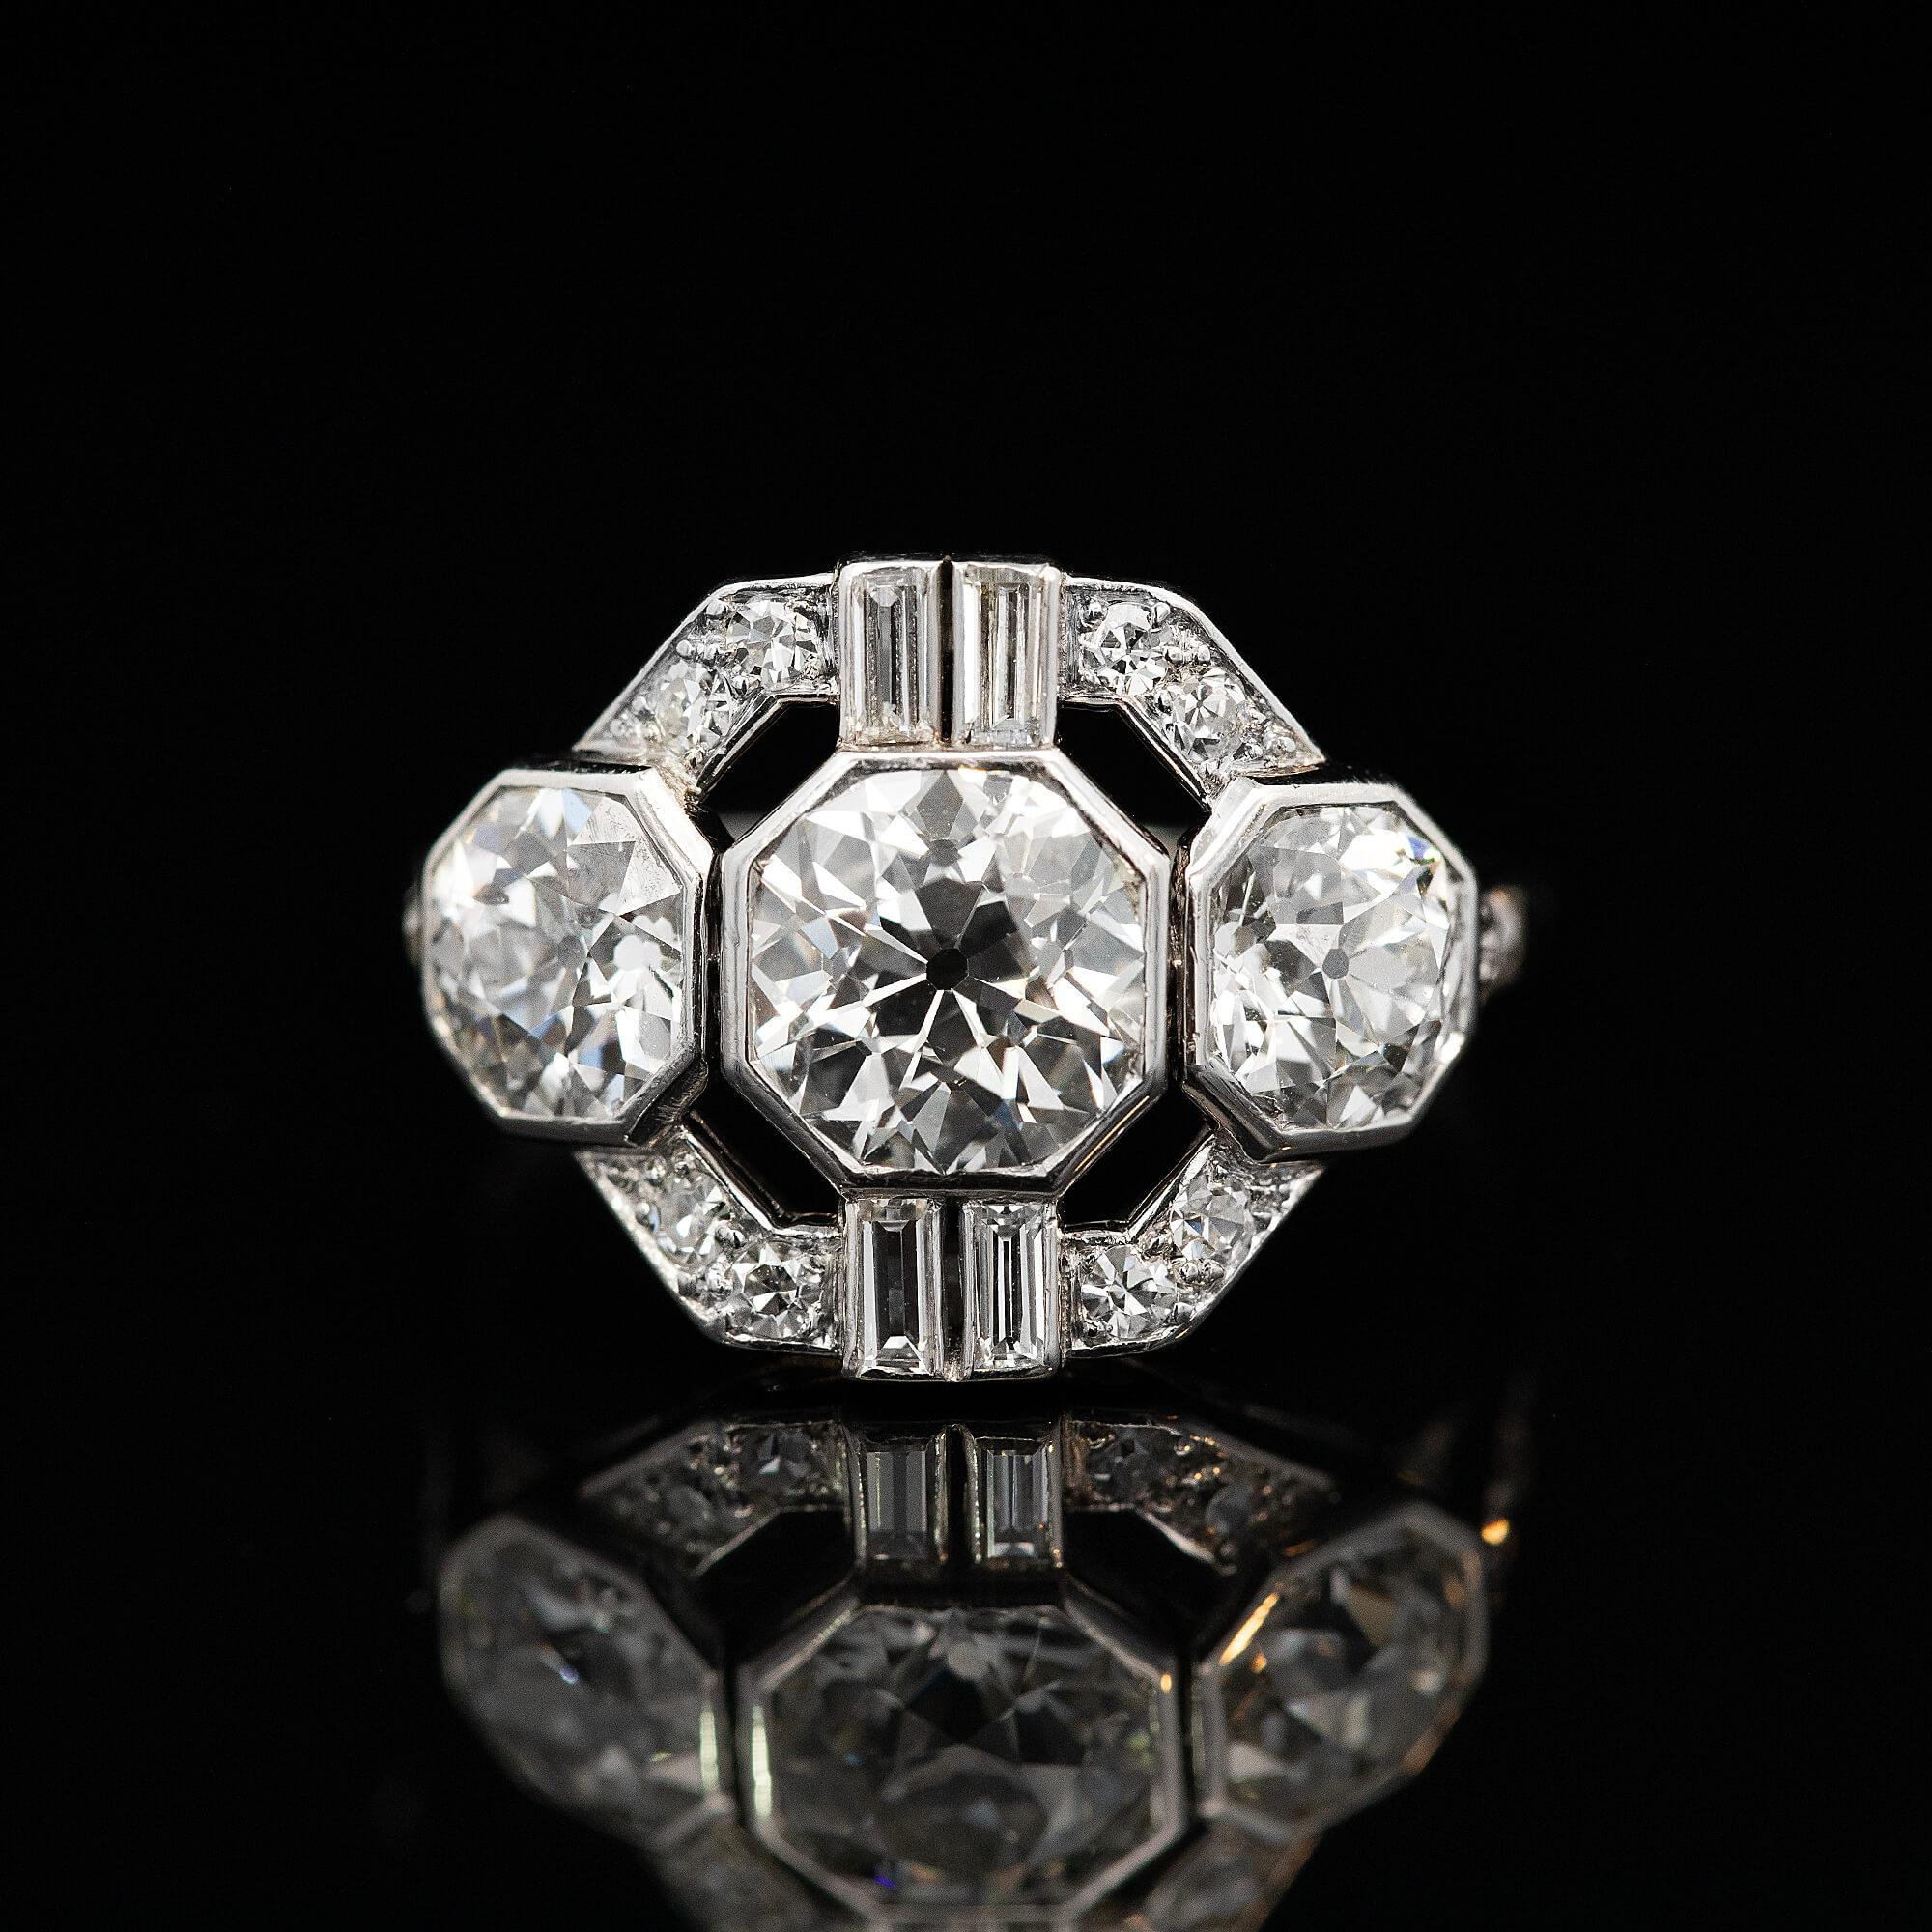 An Art Deco geometric cluster with the larger diamonds set in hexagonal bezel settings. This ring spans across the finger and diamonds set to the vanishing point. True to the era this ring brings the glamourous sparkle.

Diamond: One early European